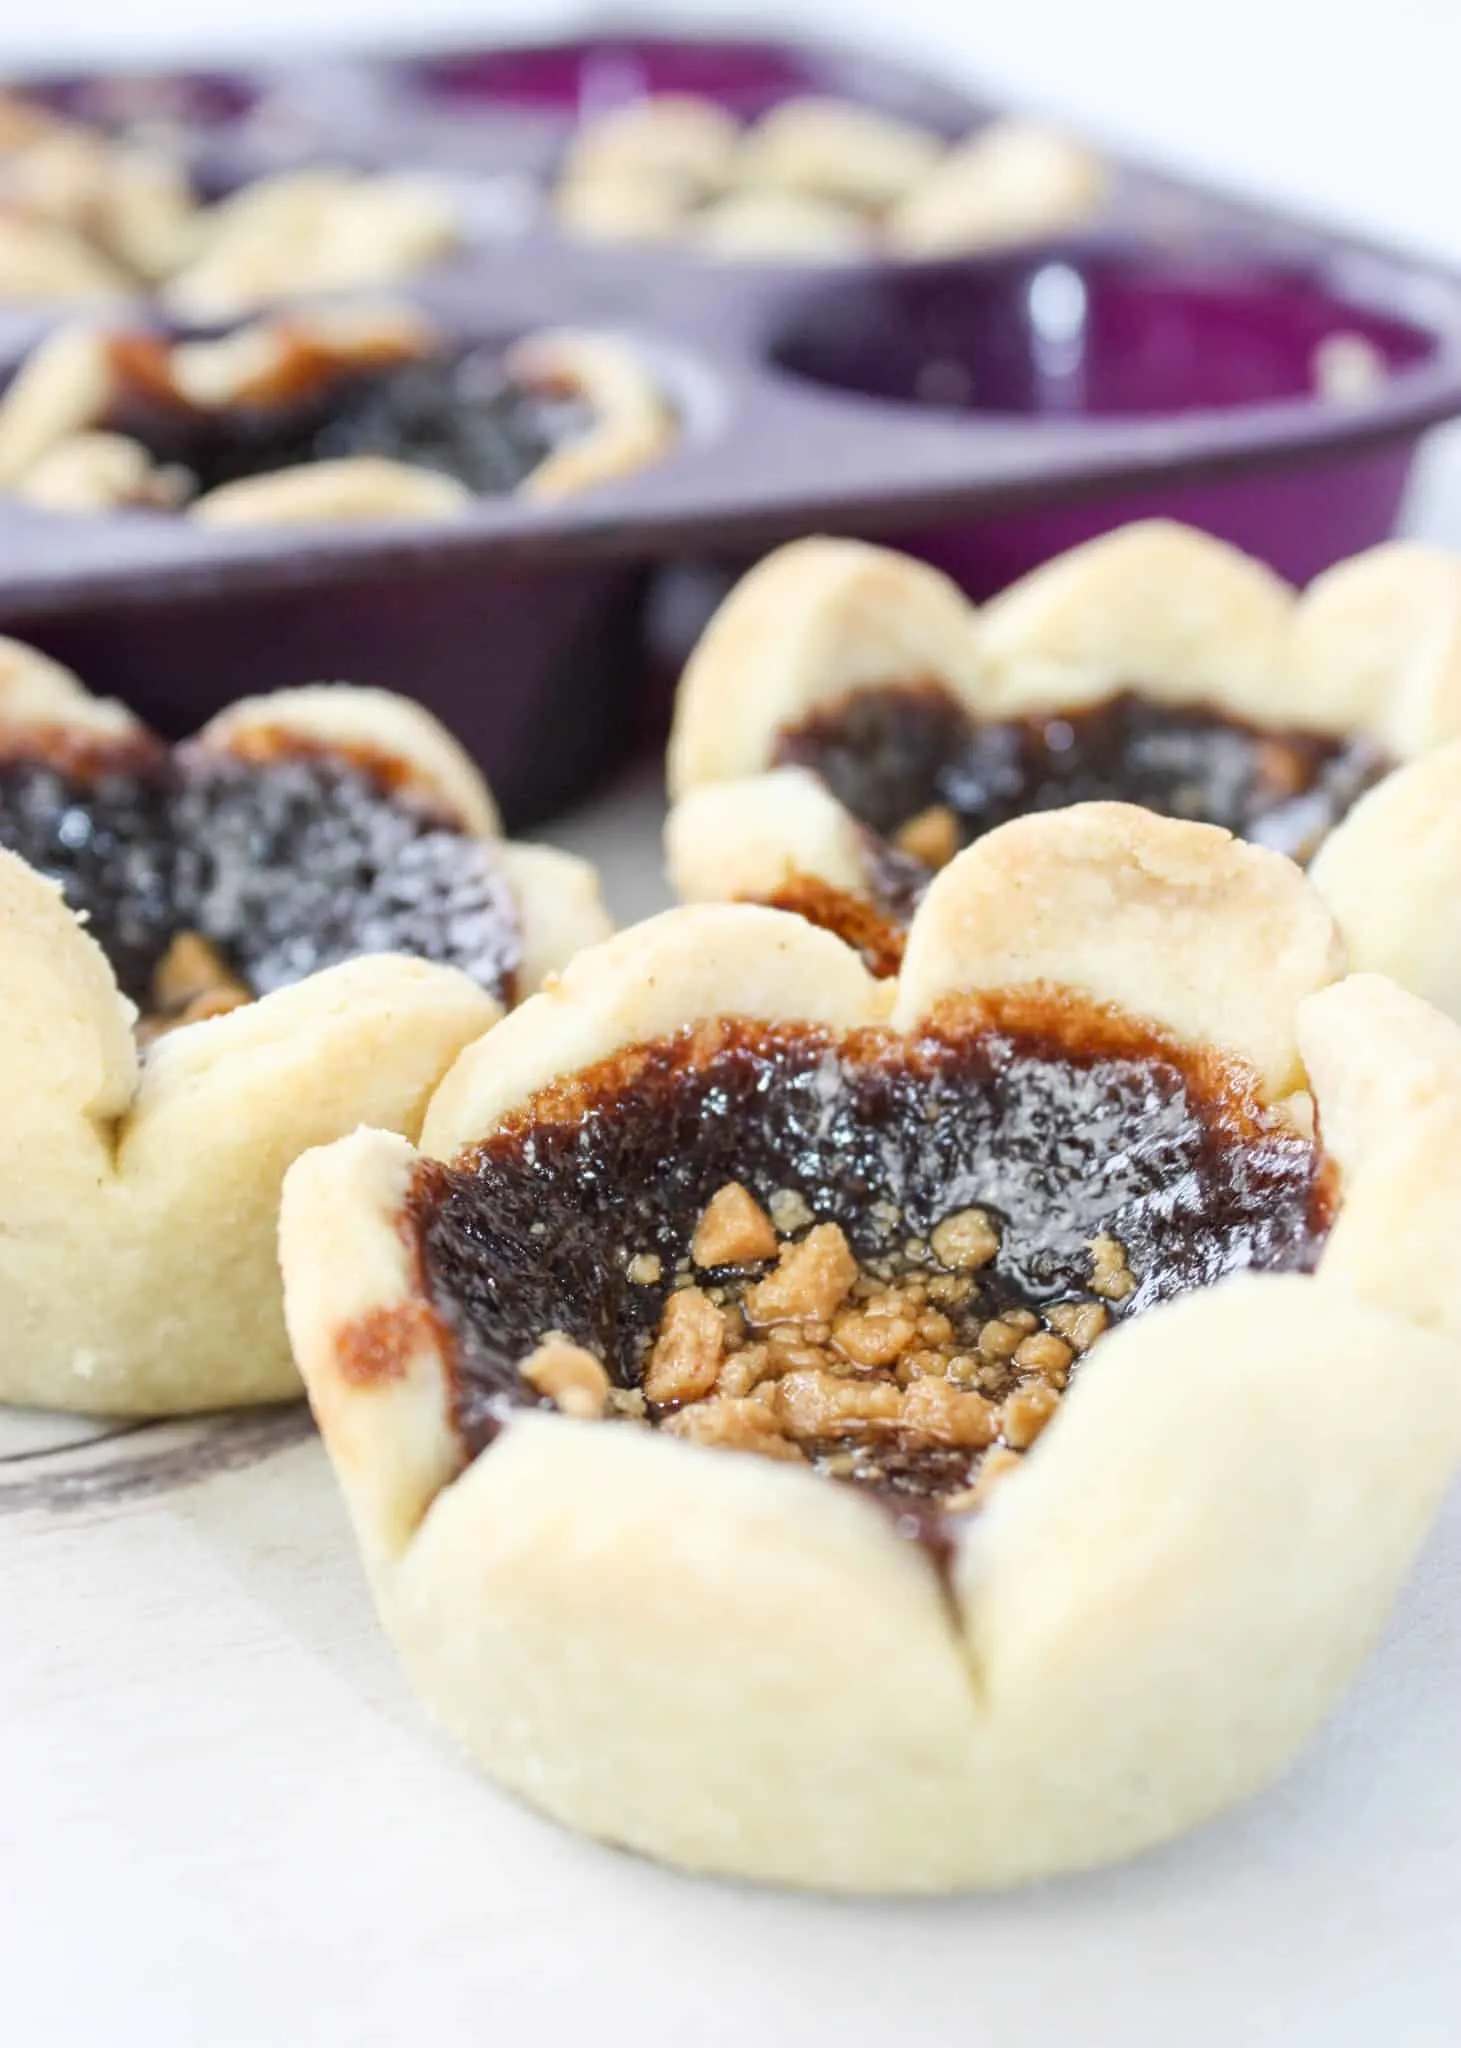 Skor Butter Tarts are a tasty variation of regular butter tarts.  This gluten free dessert pastry will be a hit with young and old alike.